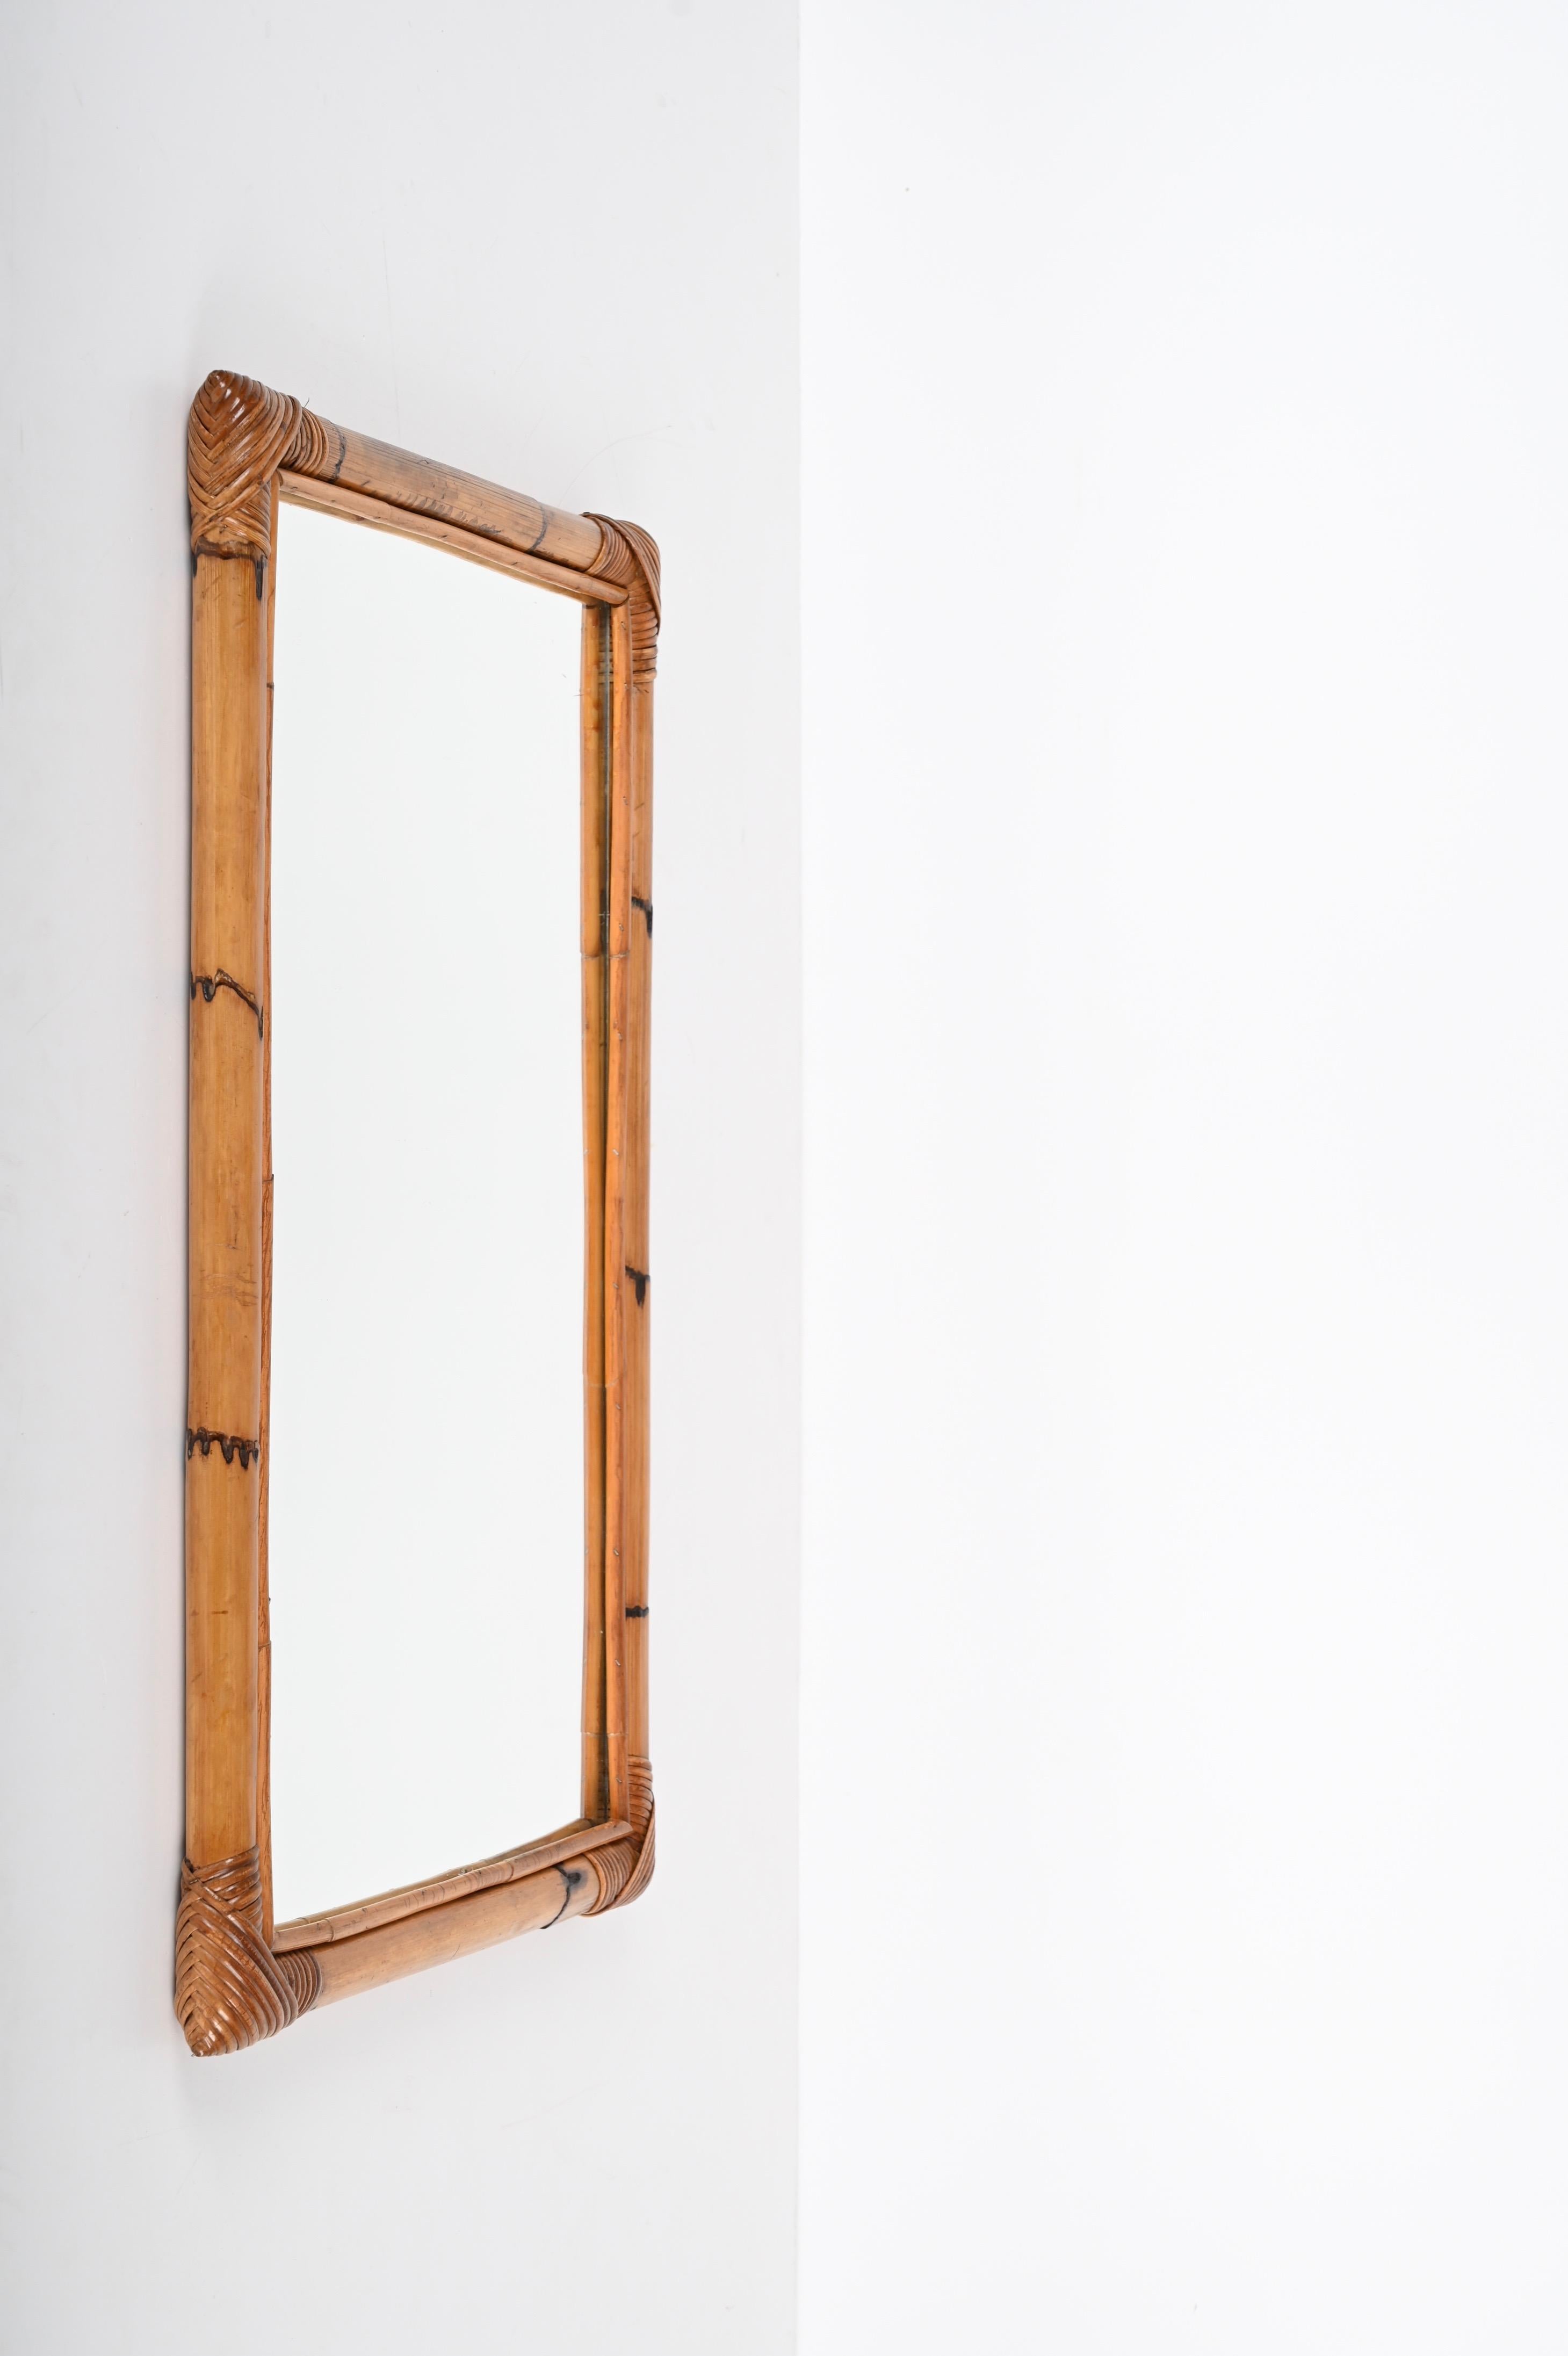 Marvellous midcentury rectangular mirror with double bamboo cane frame. This fantastic item was produced in Italy during the 1970s.

This magnificent piece is fantastic thanks to the way the straight bamboo lines with the mirror are simply